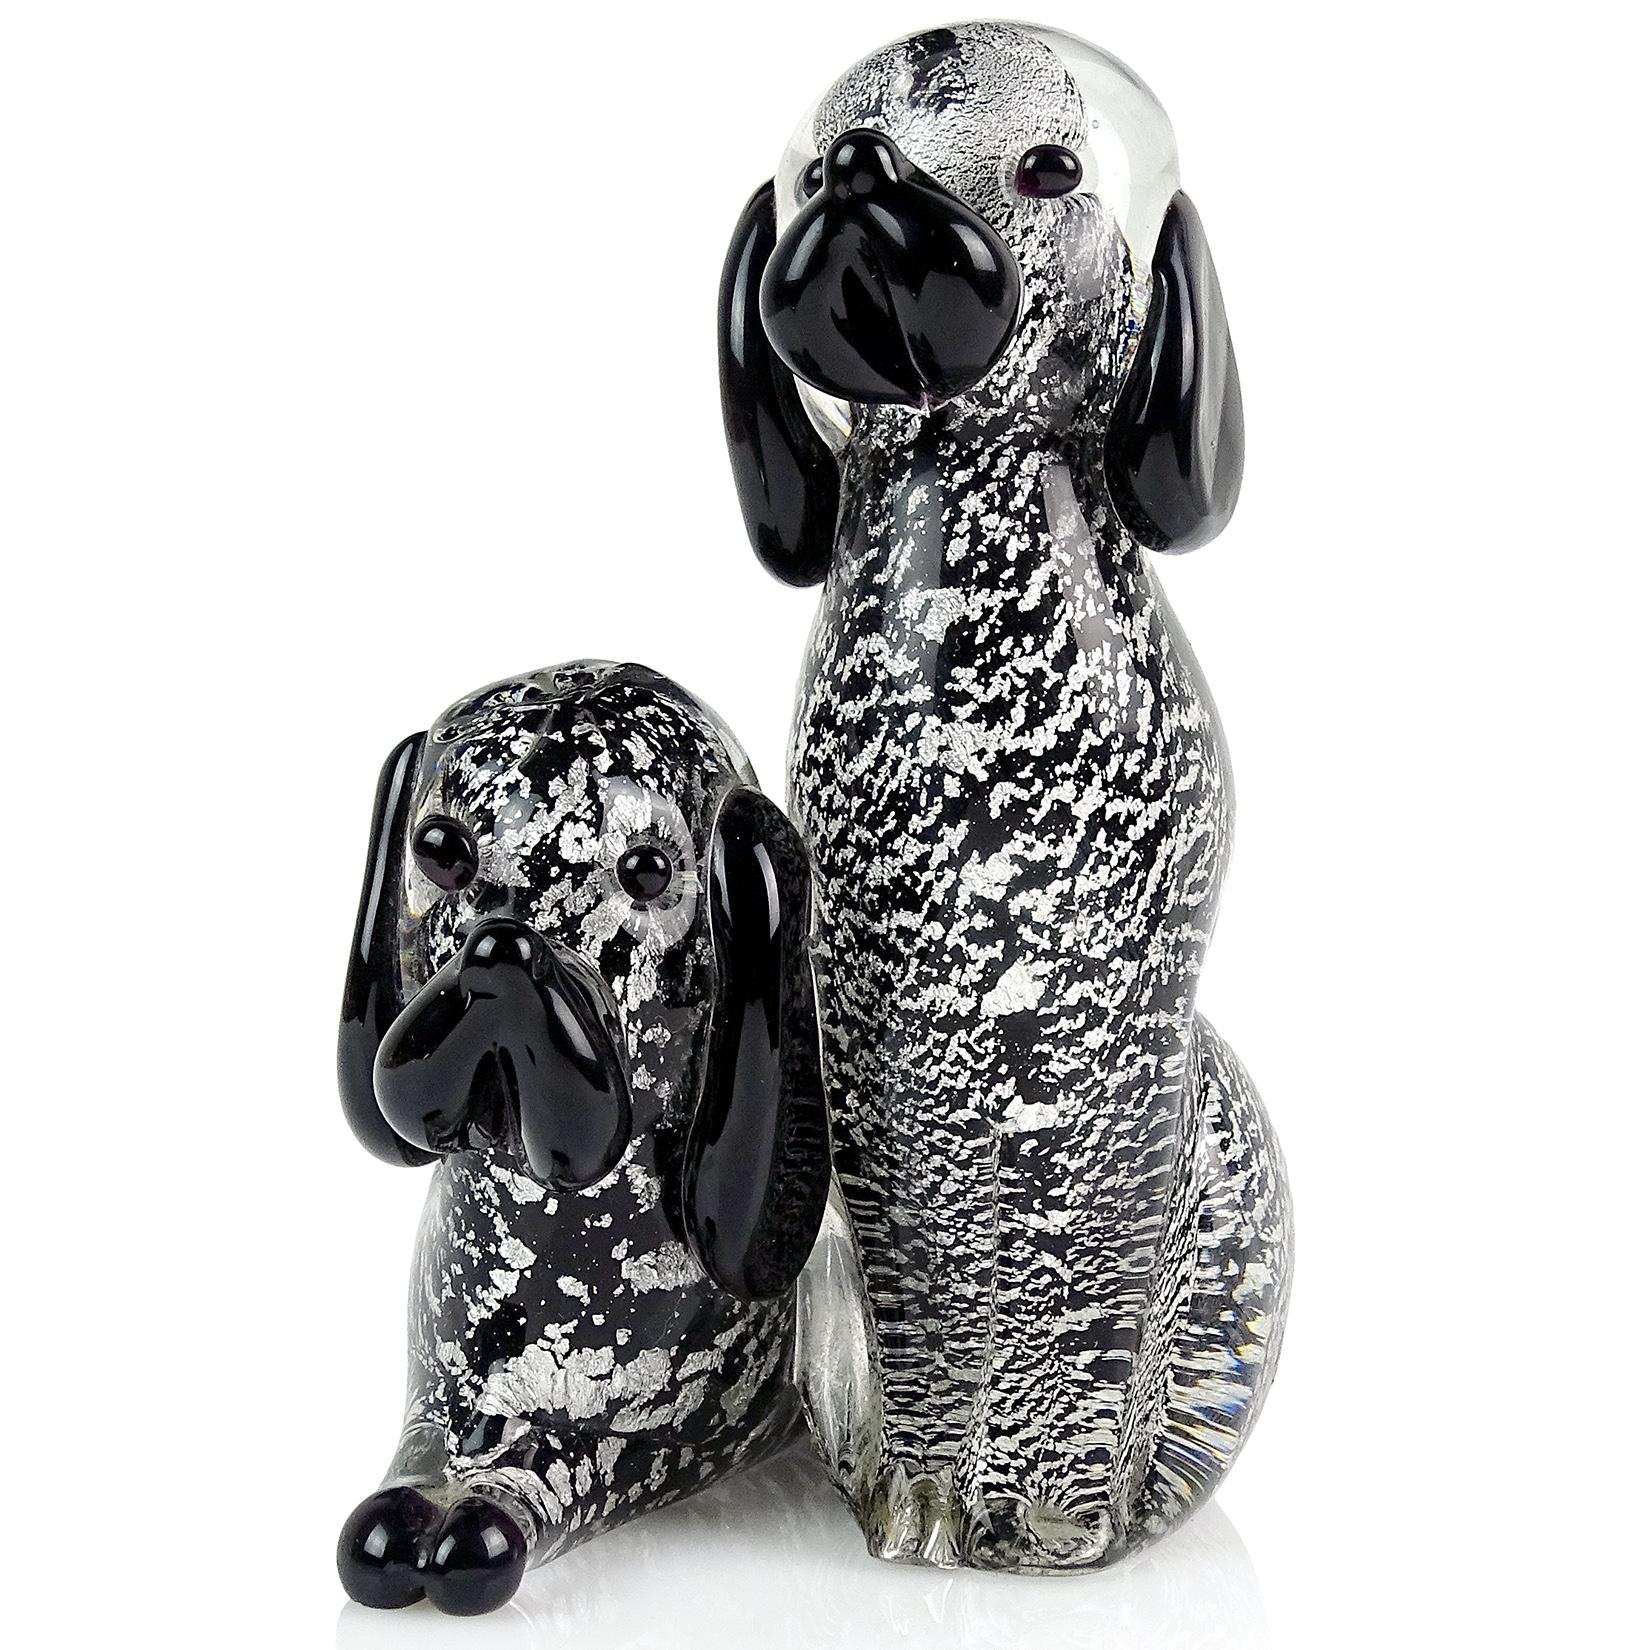 Beautiful vintage Murano hand blown black and silver flecks Italian art glass double puppy dog sculpture / figurine. The figure has 2 dogs attached to each other. Underneath there are 2 labels. One label reads 